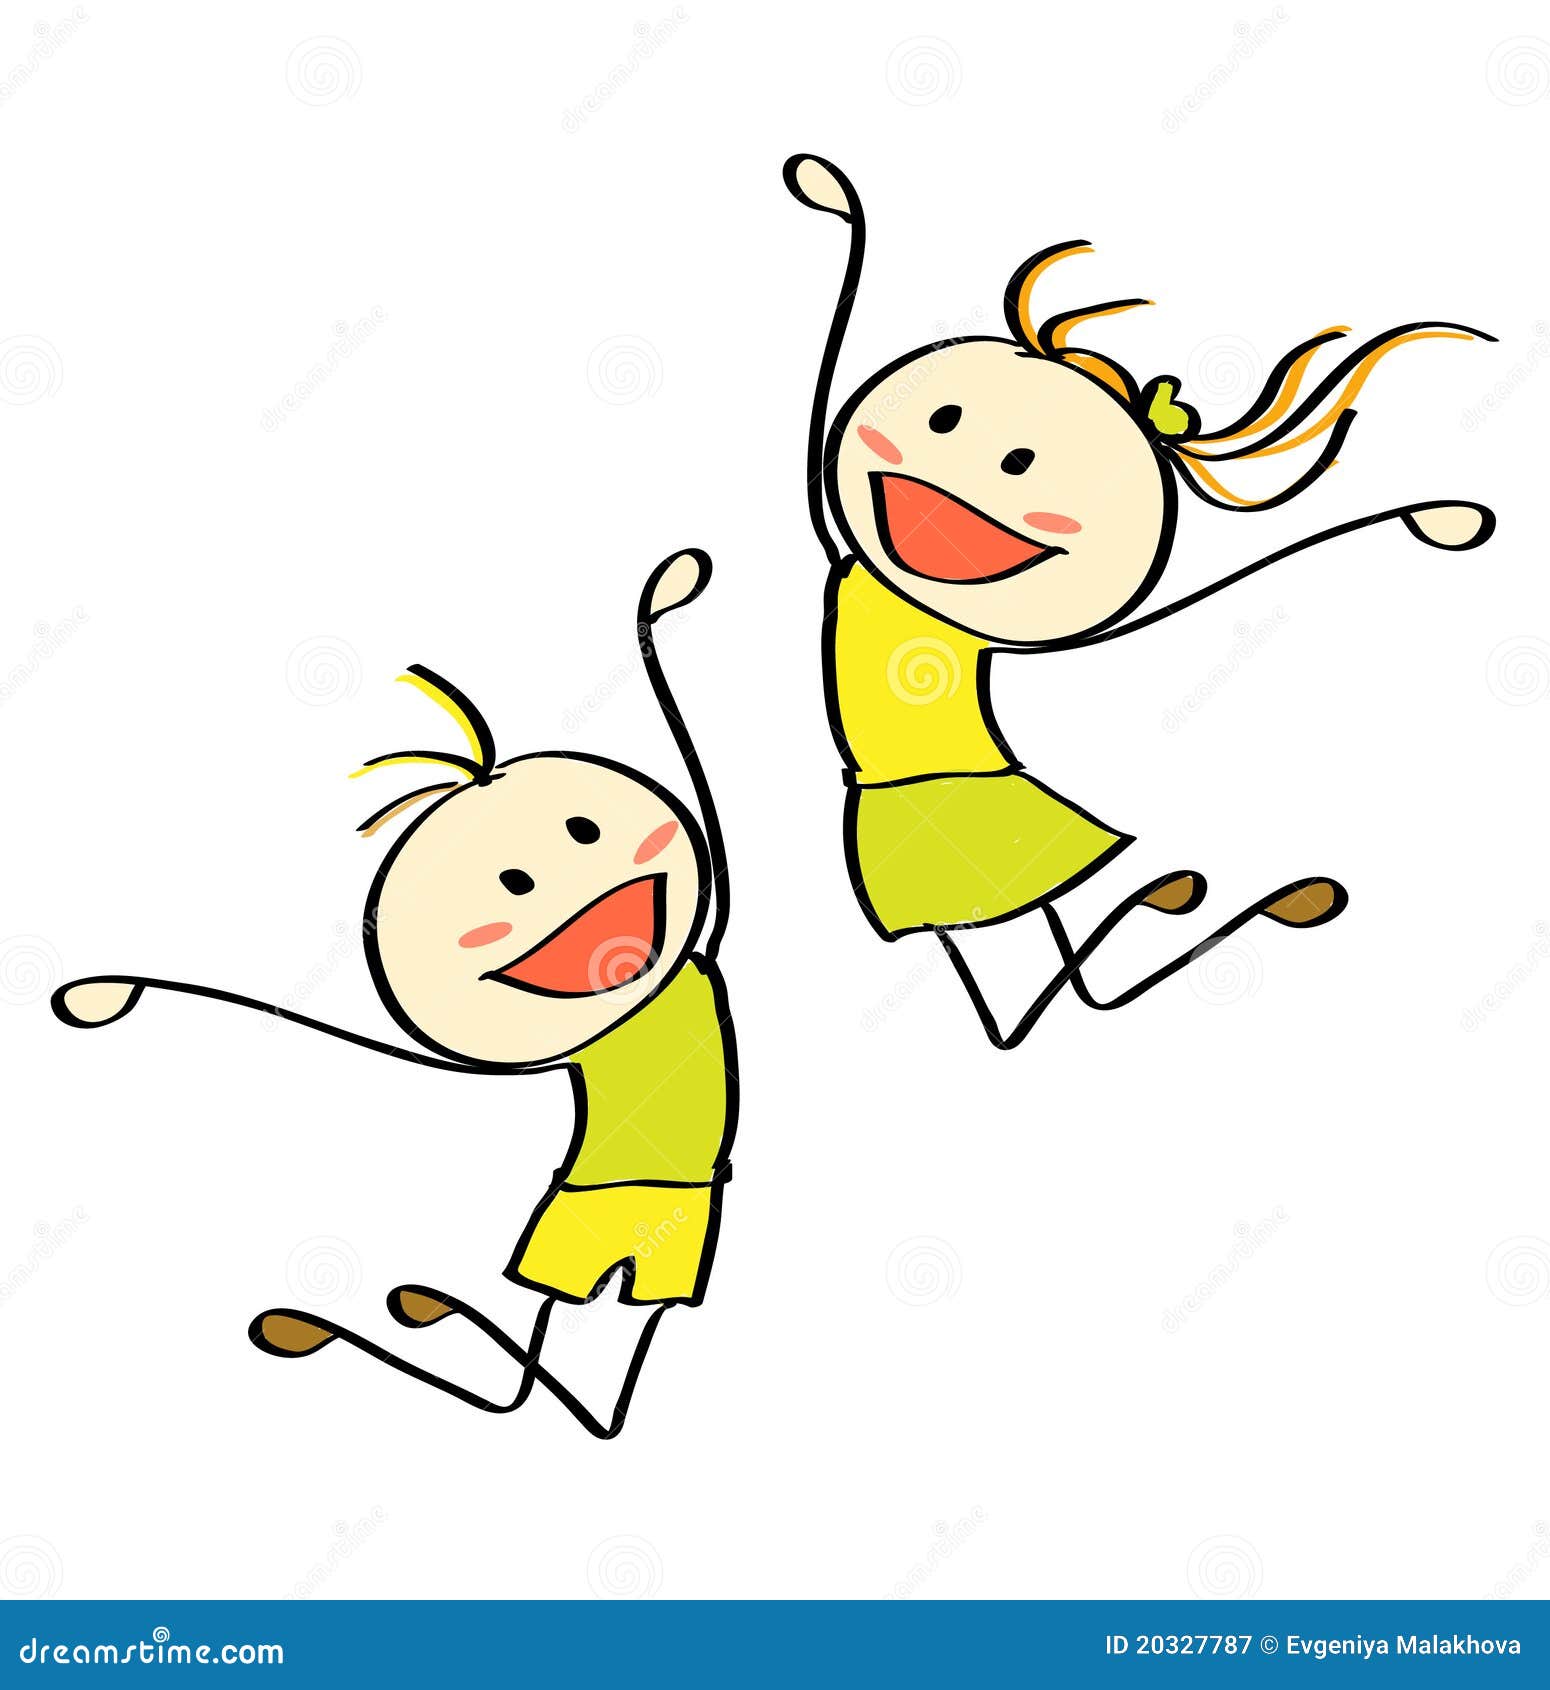 clip art for jumping - photo #2